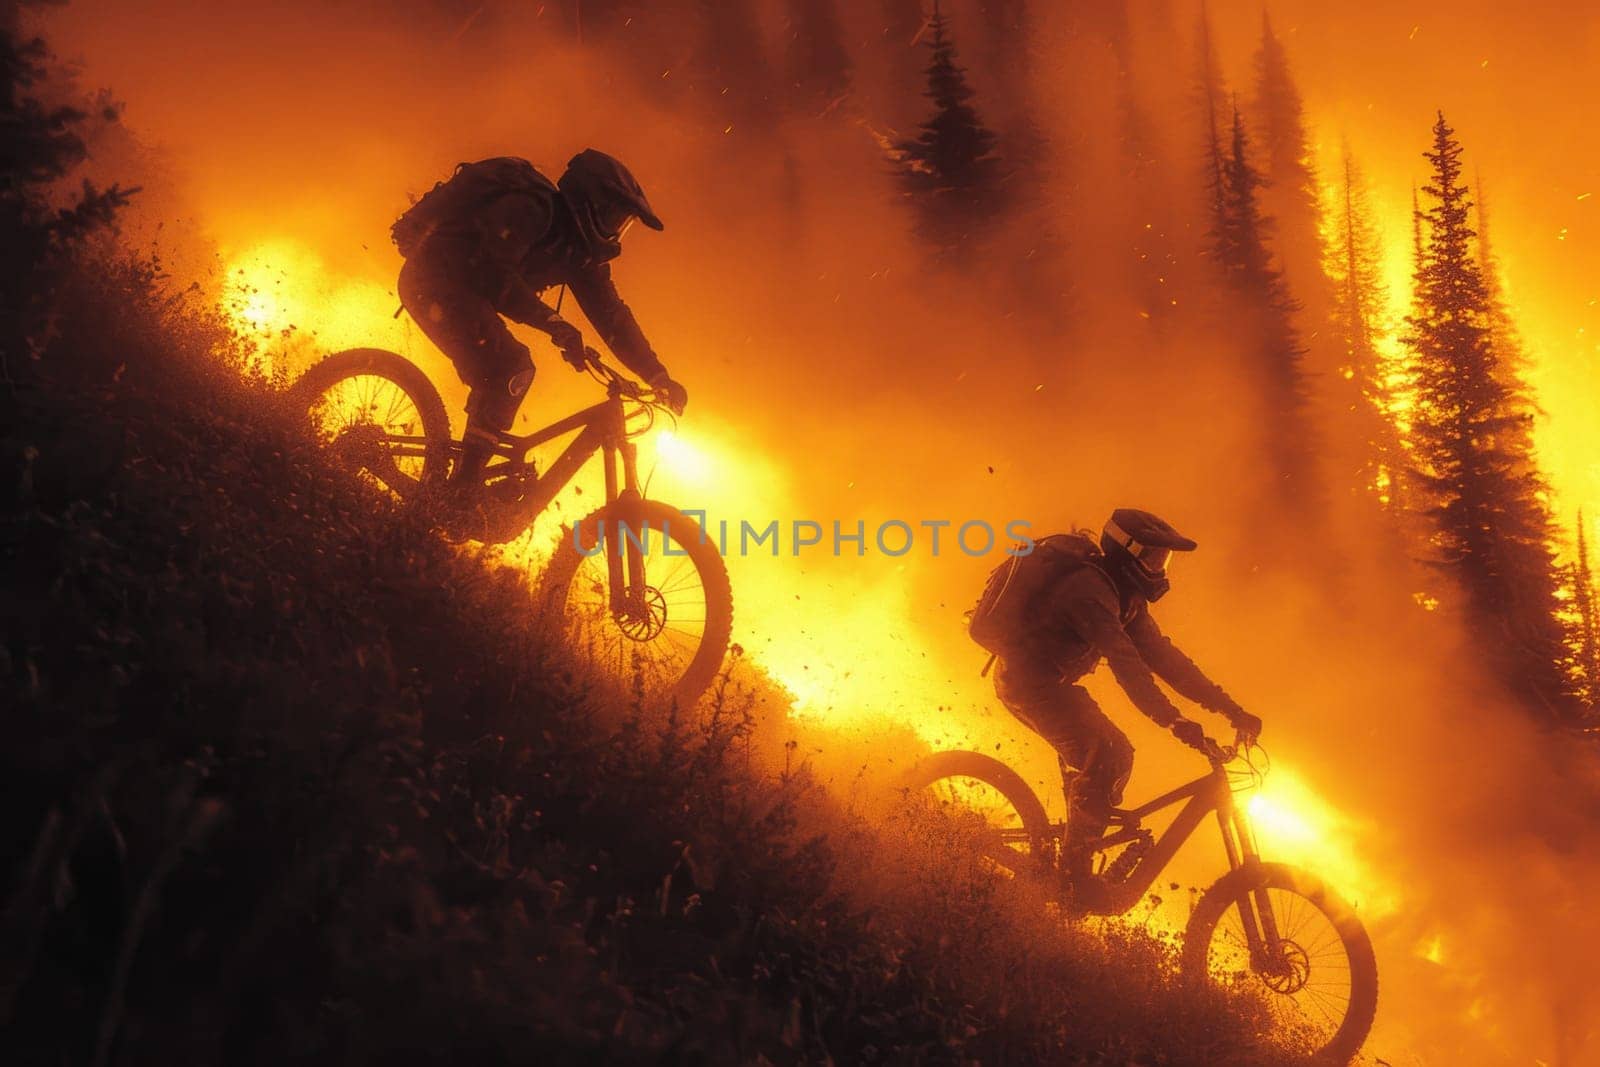 Two mountain bike riders at a mountain bike cross-country competition in the mountains.